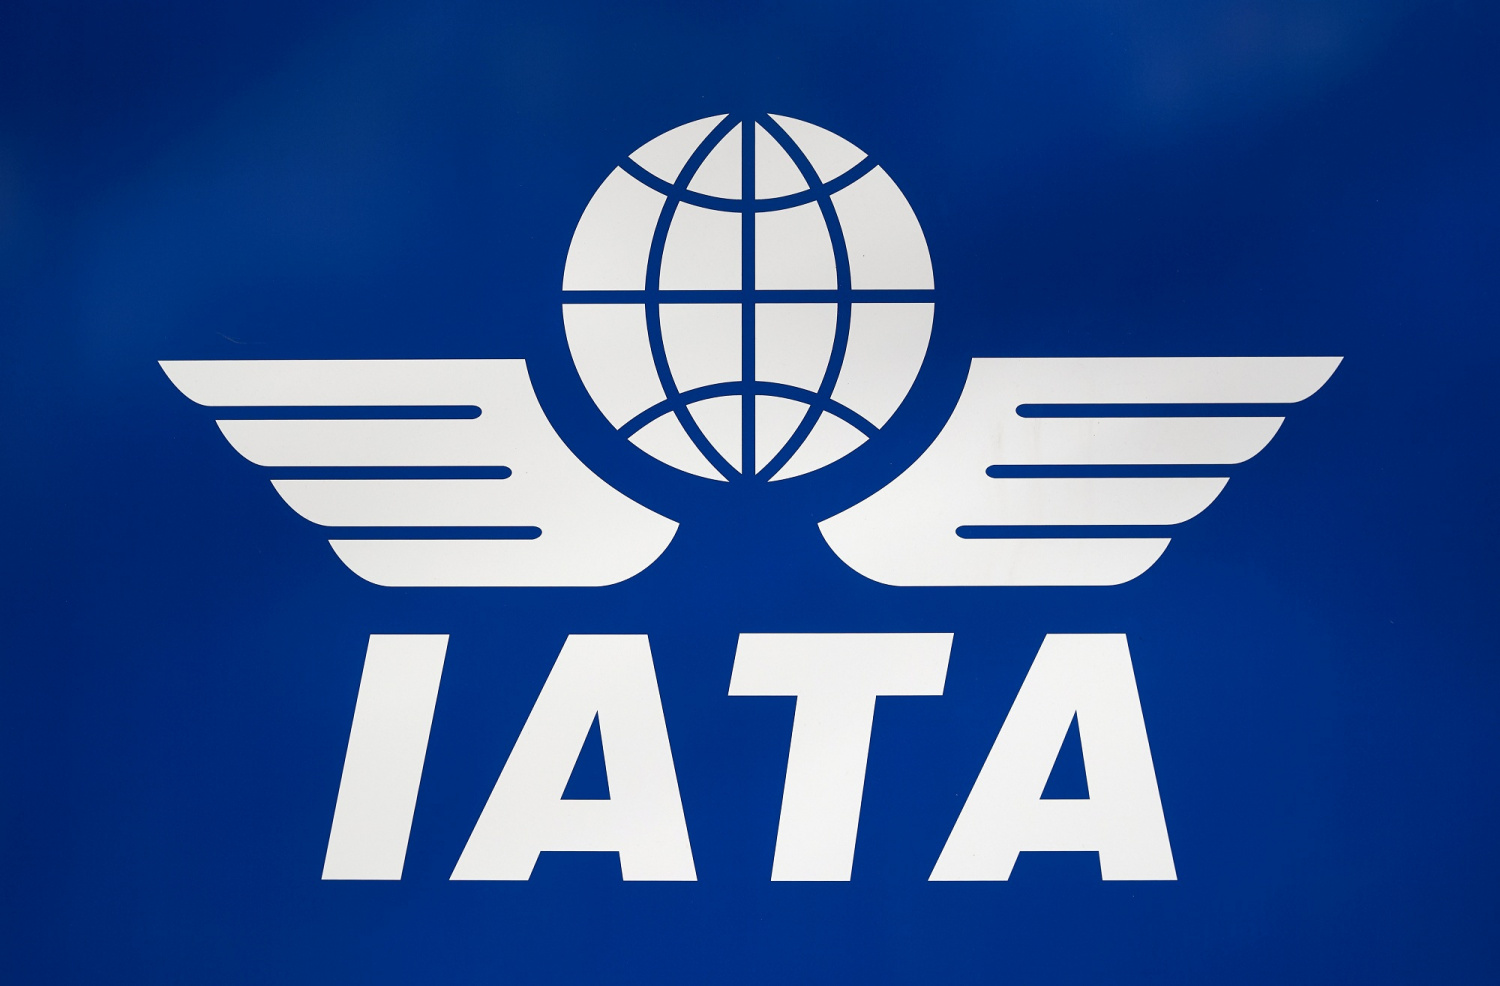 IATA Predicts Global Airline Revenues To Be Cut In Half This Year Due